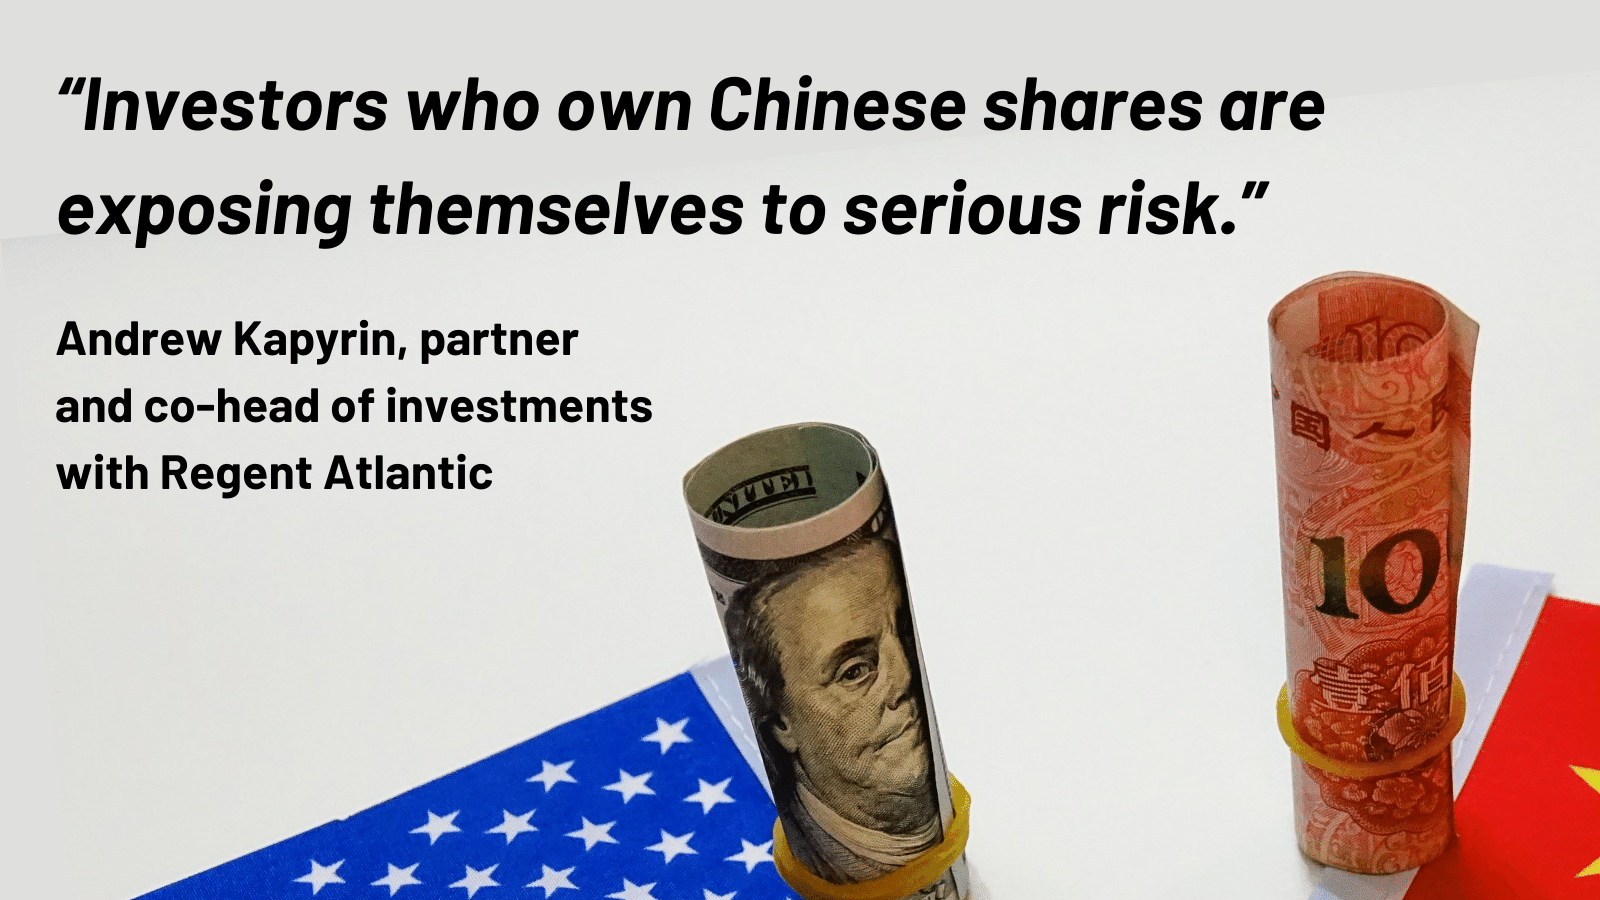 Andrew Kapyrin, partner and co-head of investments with Regent Atlantic explains how China stocks delisting from US pose a serious risk to American investors. Investors who own Chinese shares are exposing themselves to serious risk, he says